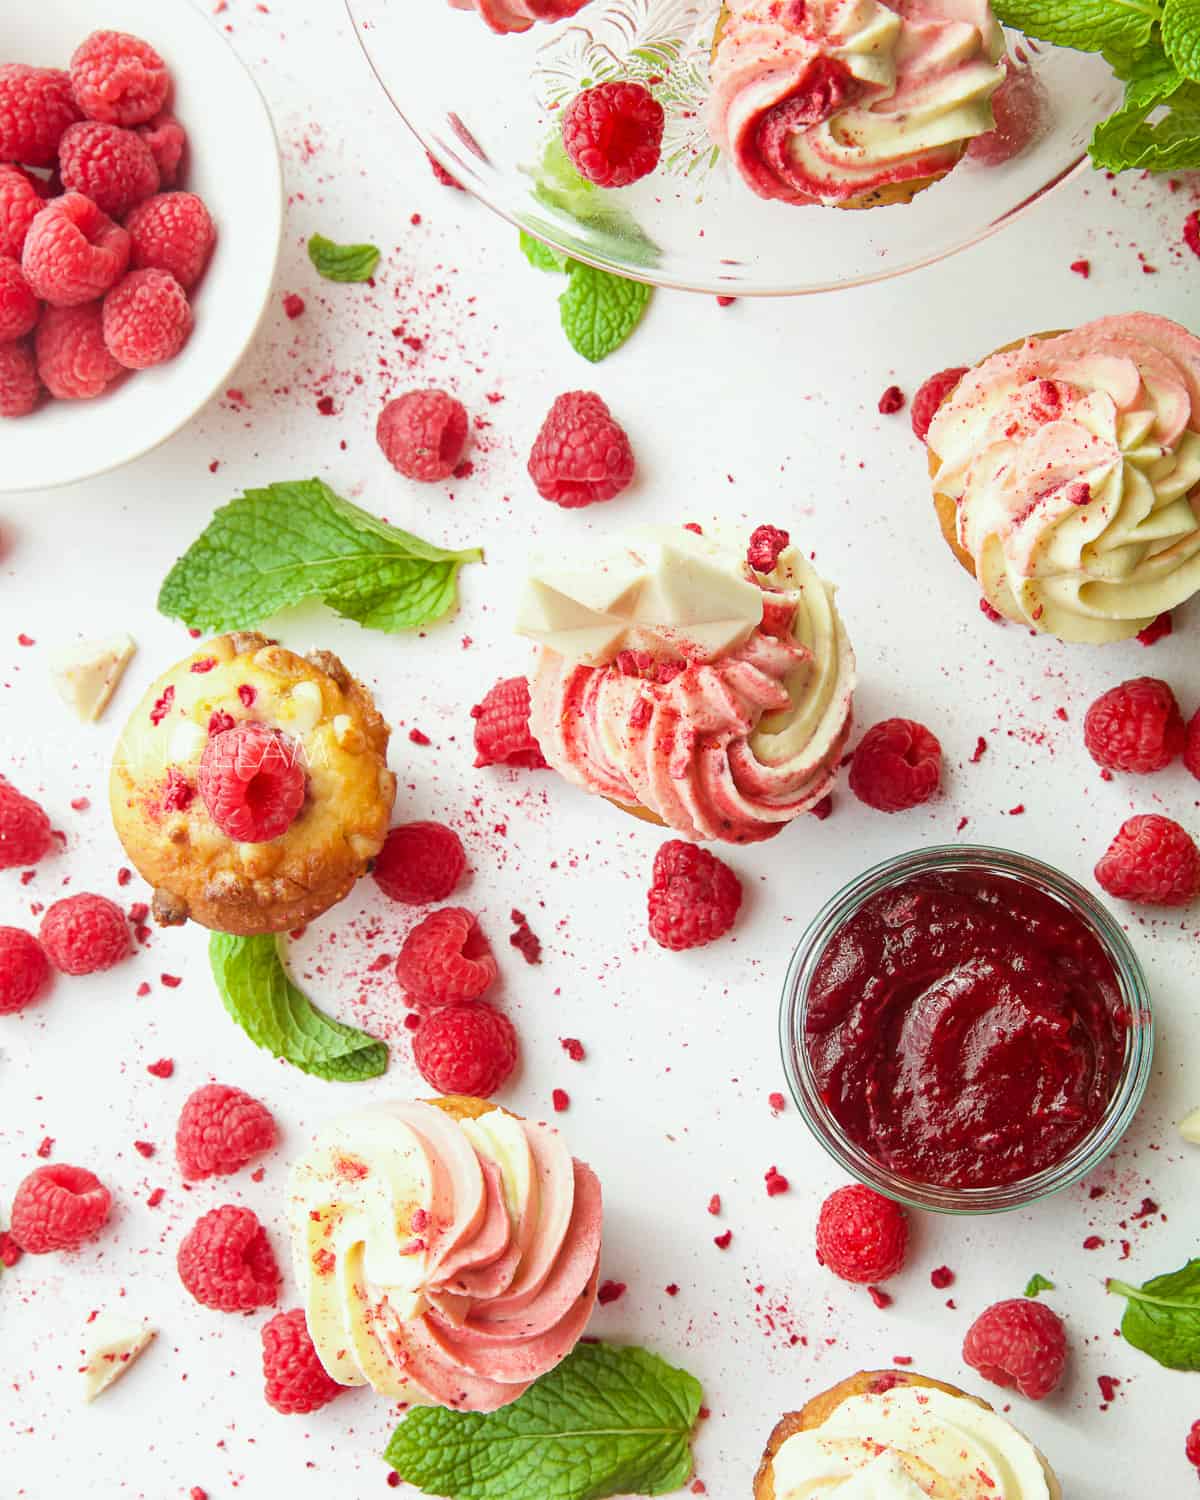 raspberry muffins, berries and mint on a white background.